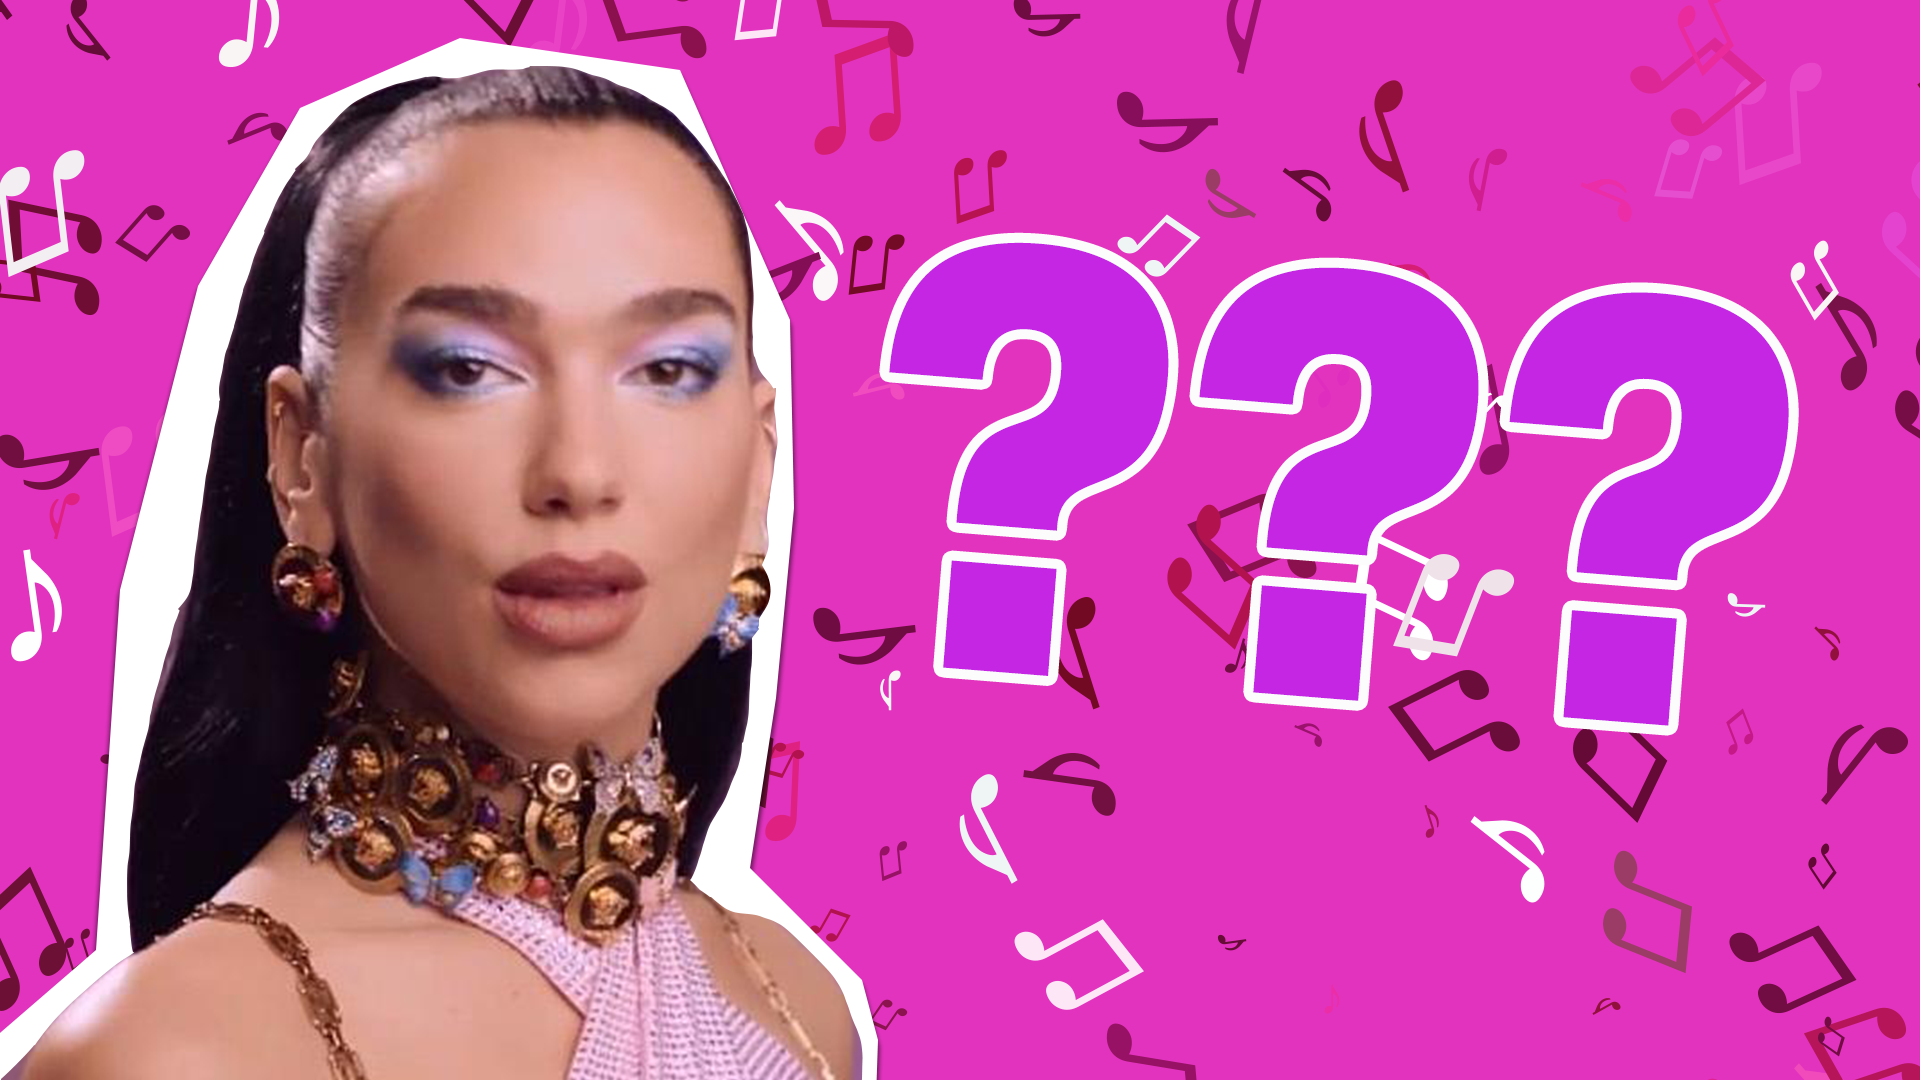 Barbie Soundtrack Quiz - Are You Ready?